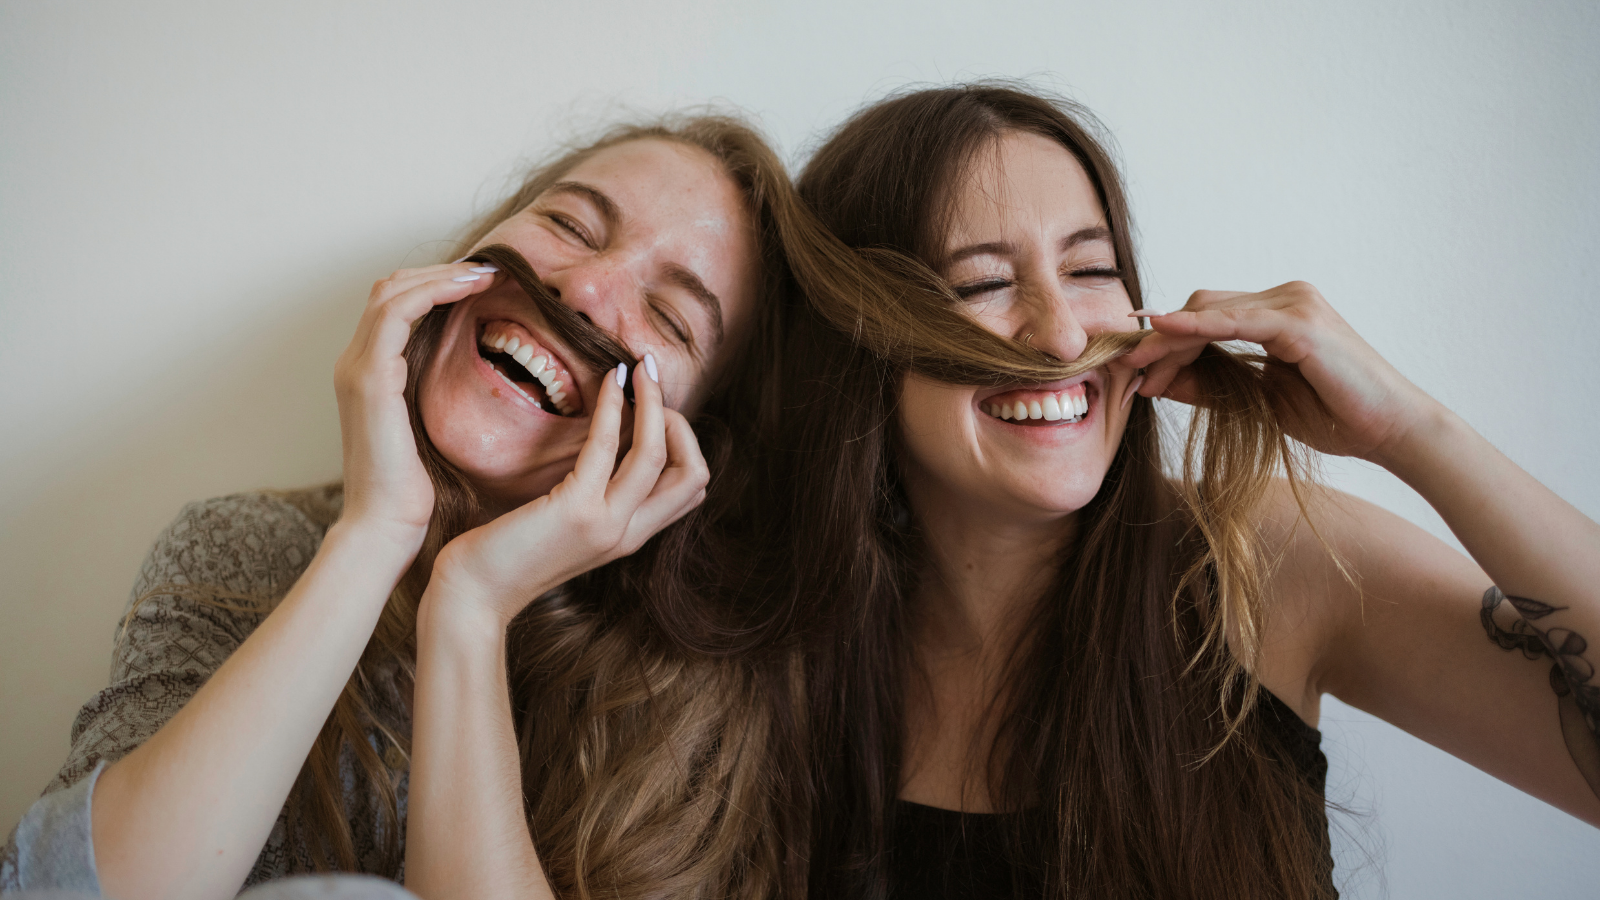 Two girls laughing, they are playing around with hair to make mustaches